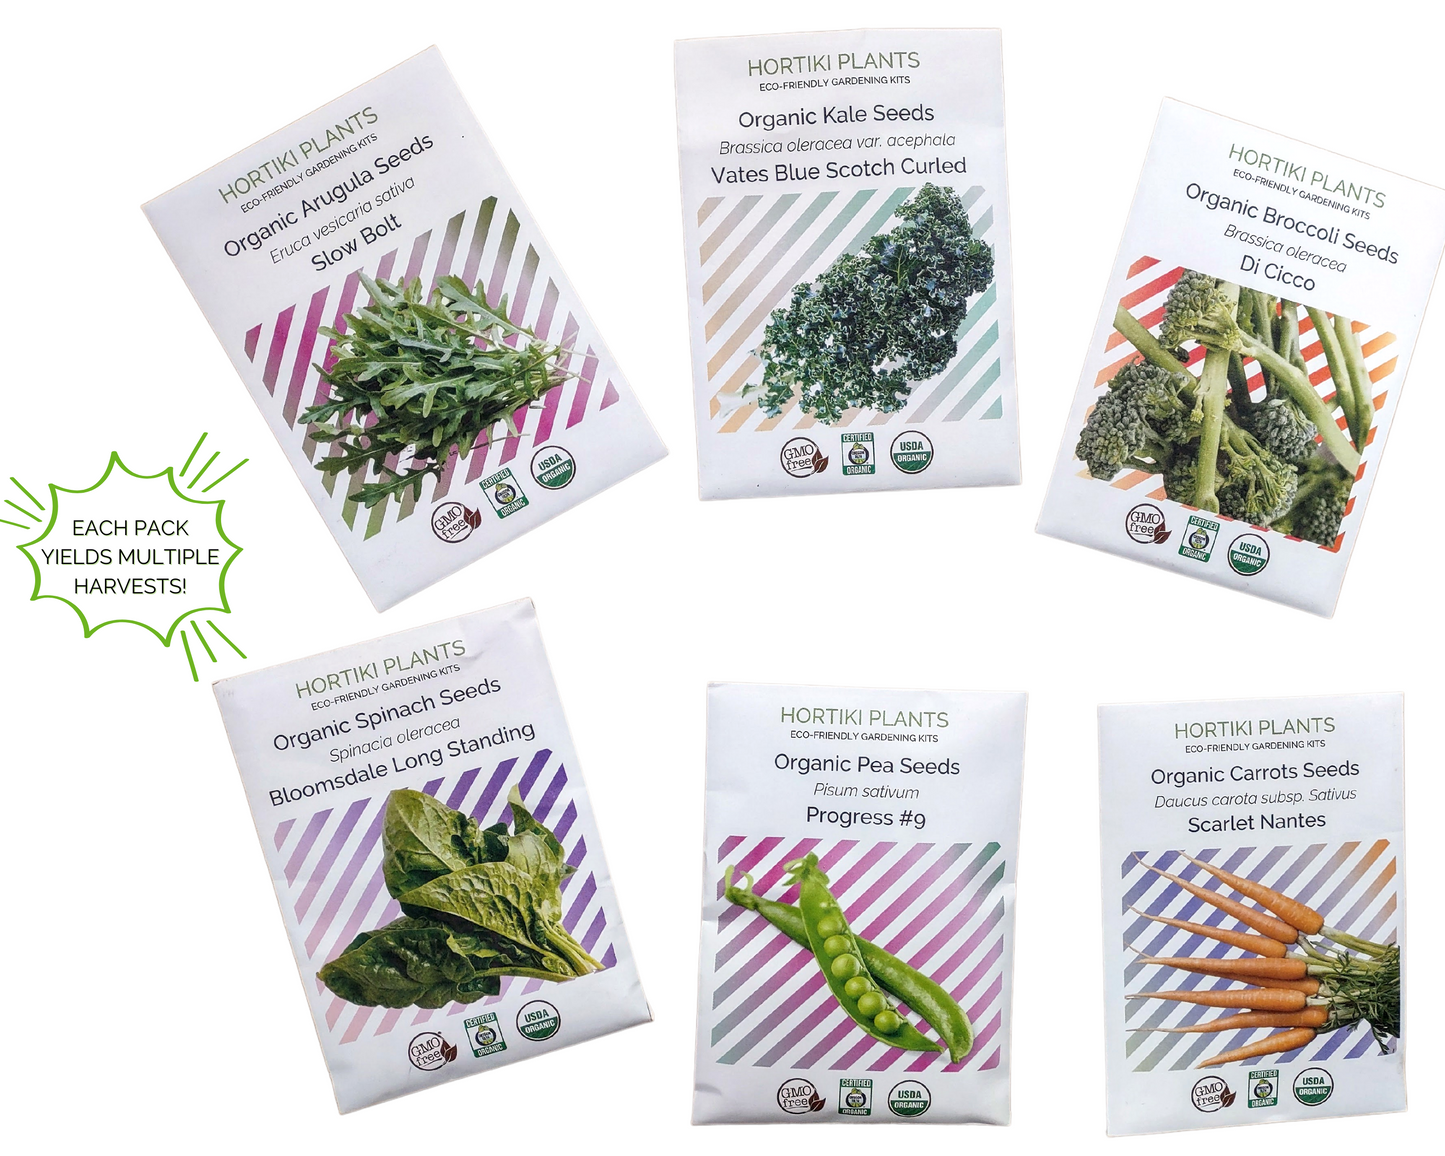 Healthy Start Organic Vegetable Seed Collection: Arugula, Spinach, Kale, Carrots, Broccoli, Peas